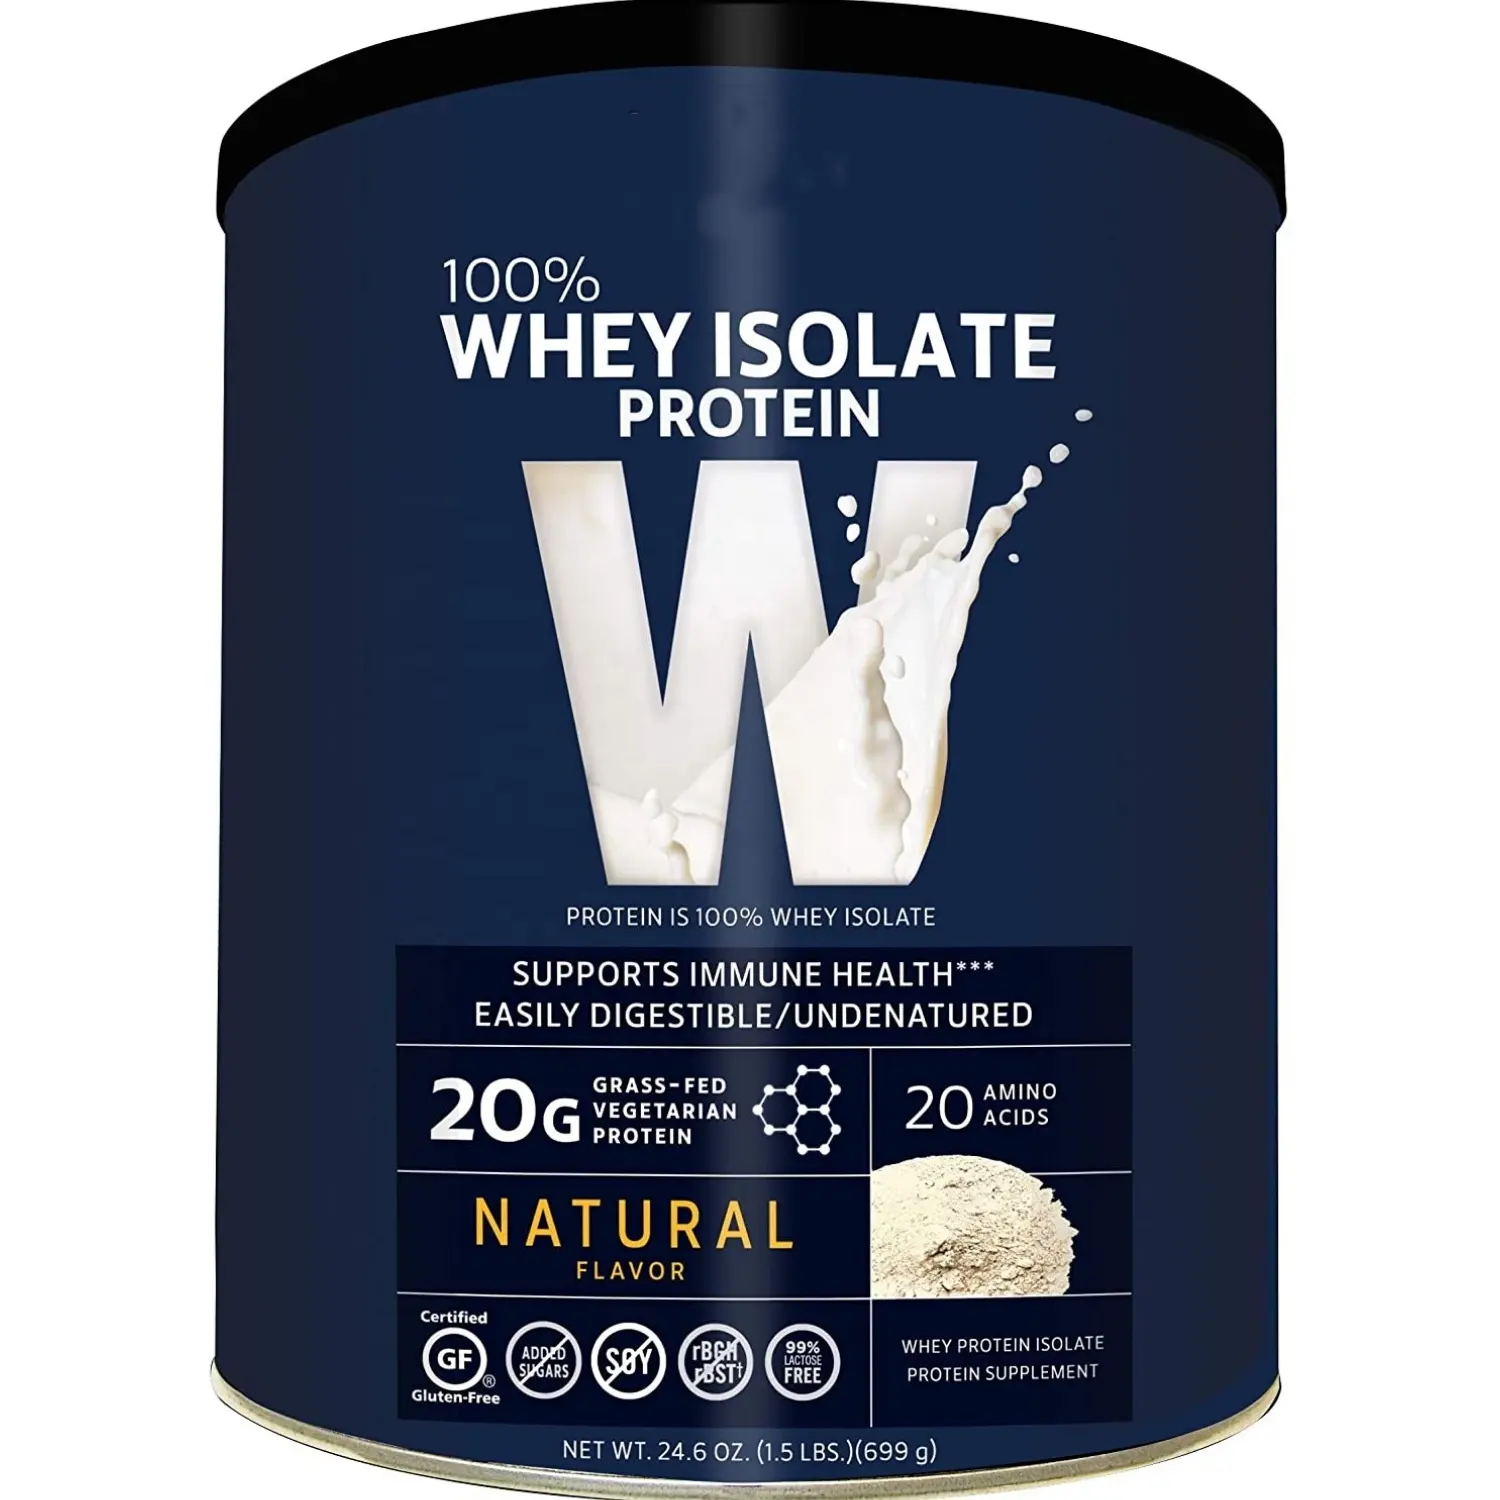 Wholesale 100% Whey Isolate Protein Natural Flavor Pre & Post Workout Meal Replacement Keto Friendly 20g of Protein 1 kg